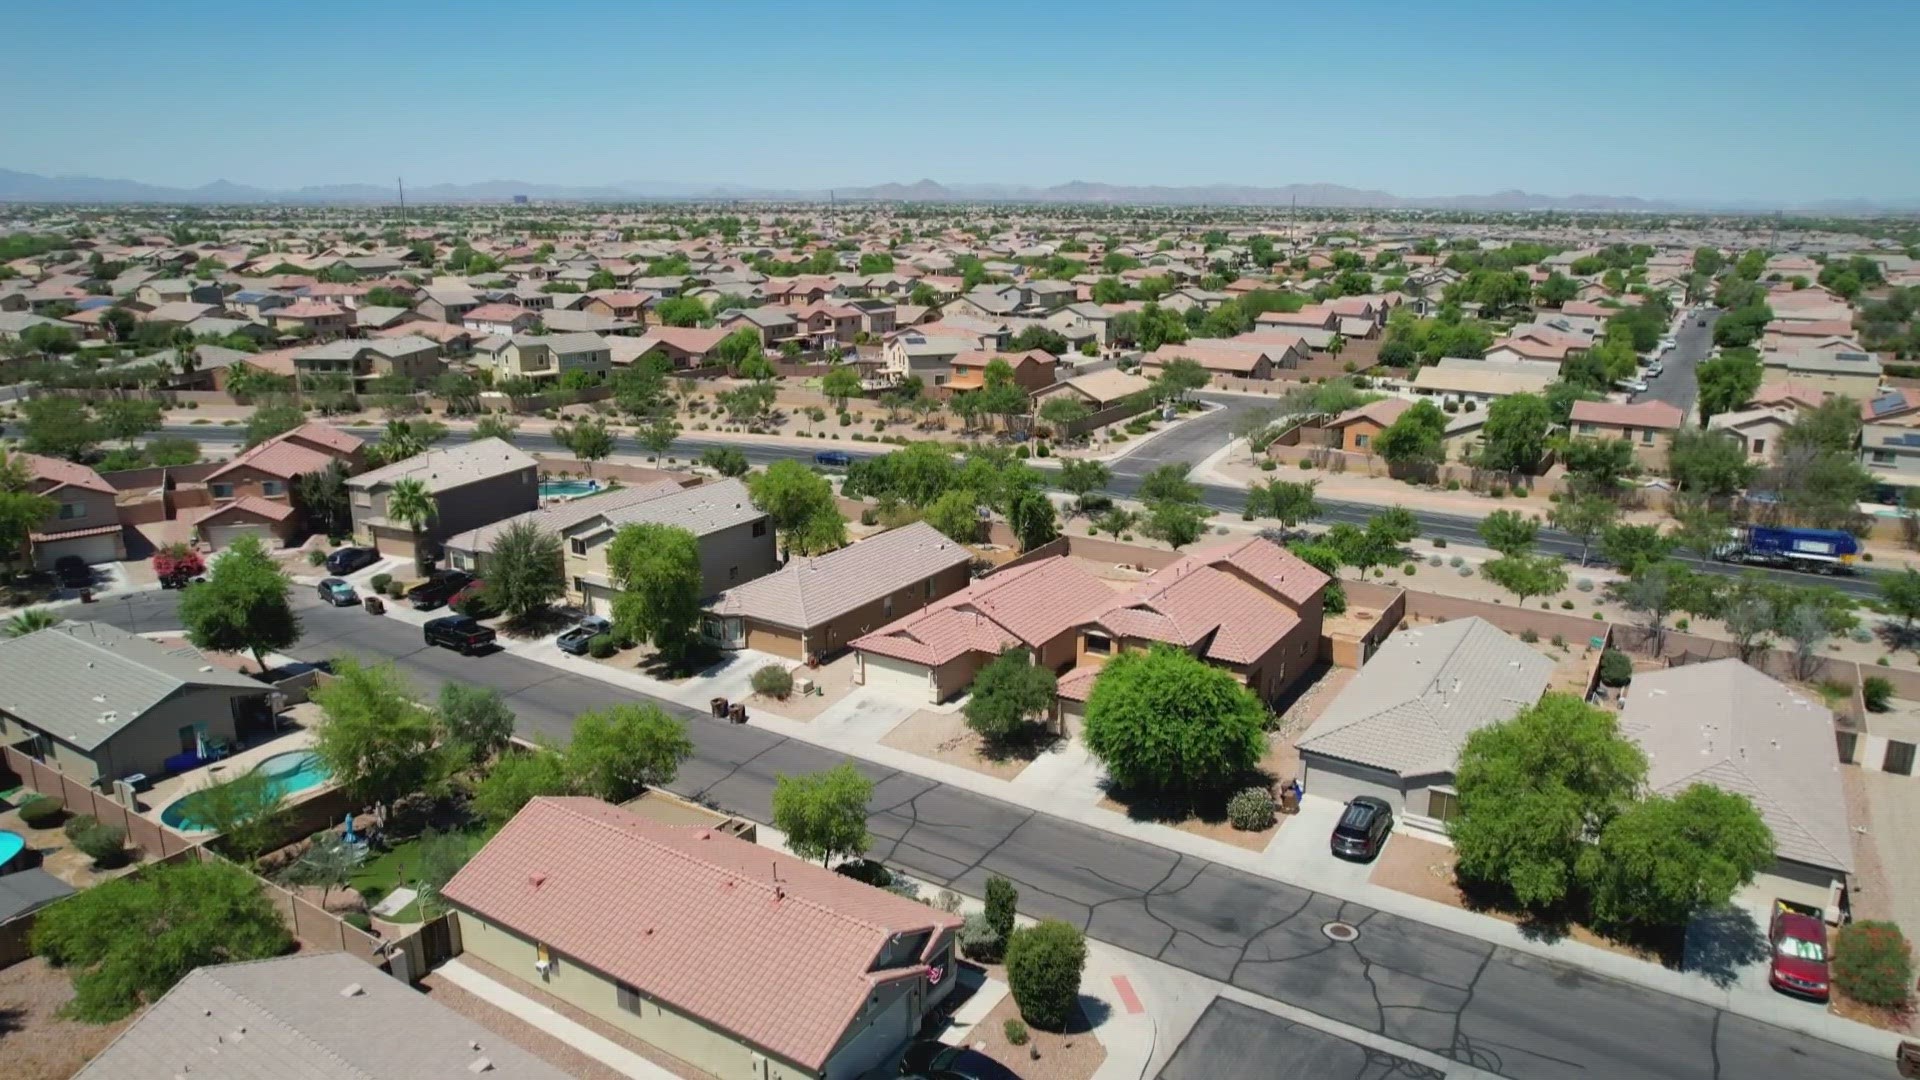 Two lawmakers who represent the City of Maricopa are responding to complaints made by residents who have purchased new homes as the city continues to rapidly grow.